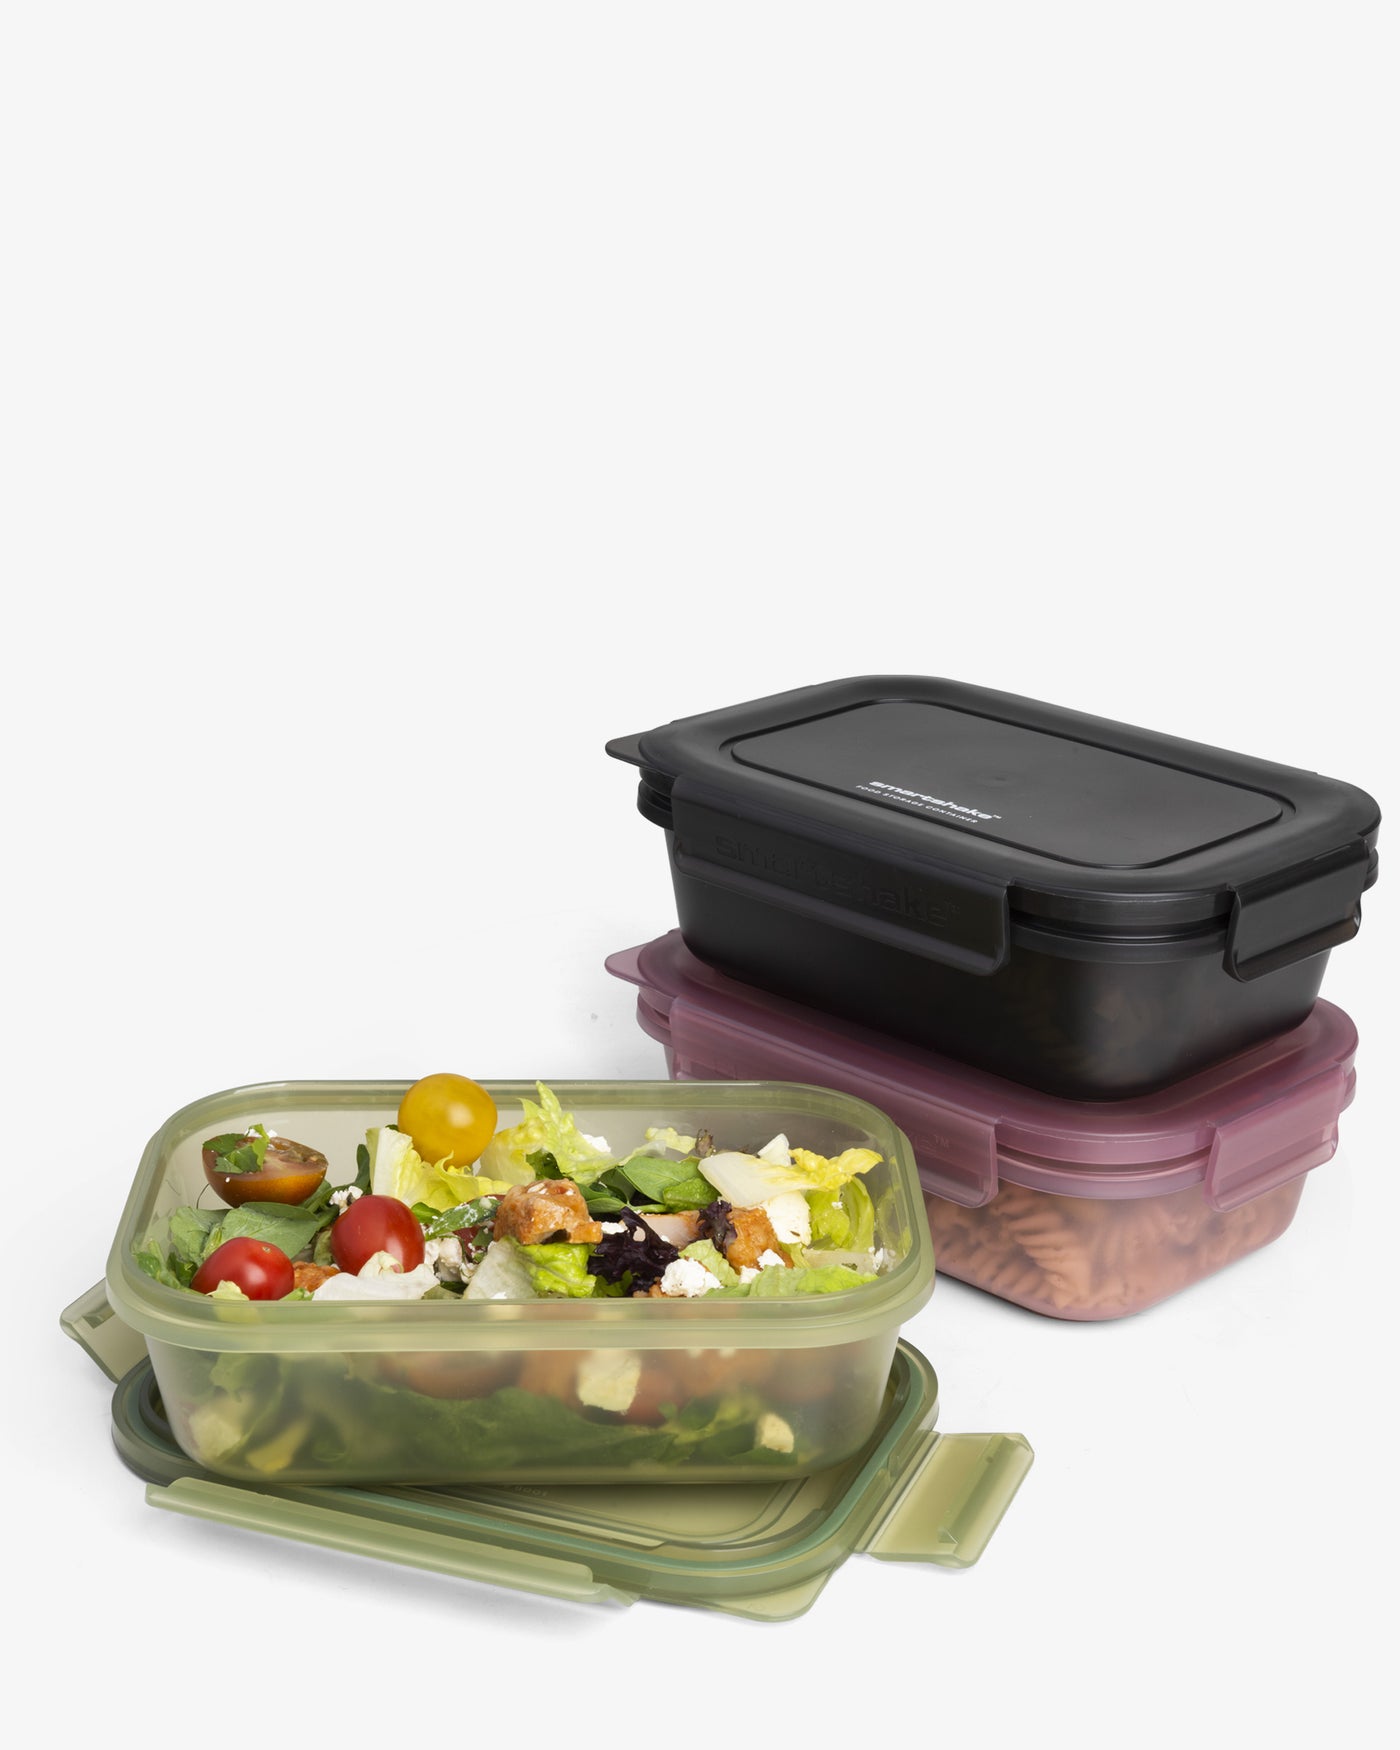 Buy 5 Food Storage Container and get 40% OFF